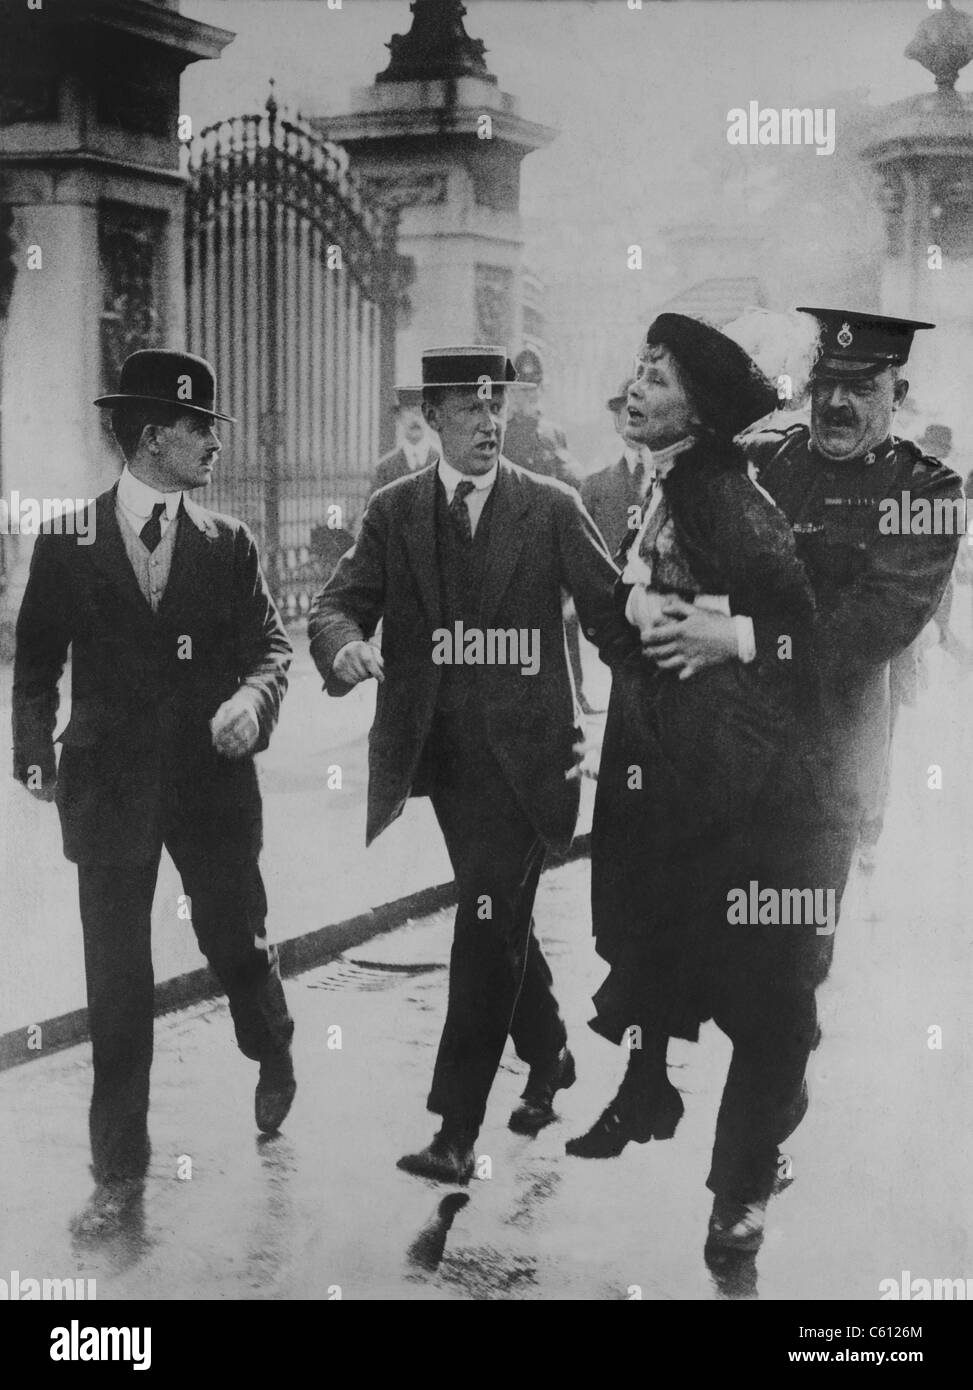 British suffragette Emmeline Pankhurst arrested and carried away by a policeman for leading suffragettes attempt to present a petition to King George V at Buckingham Palace. June 2, 1914. Stock Photo